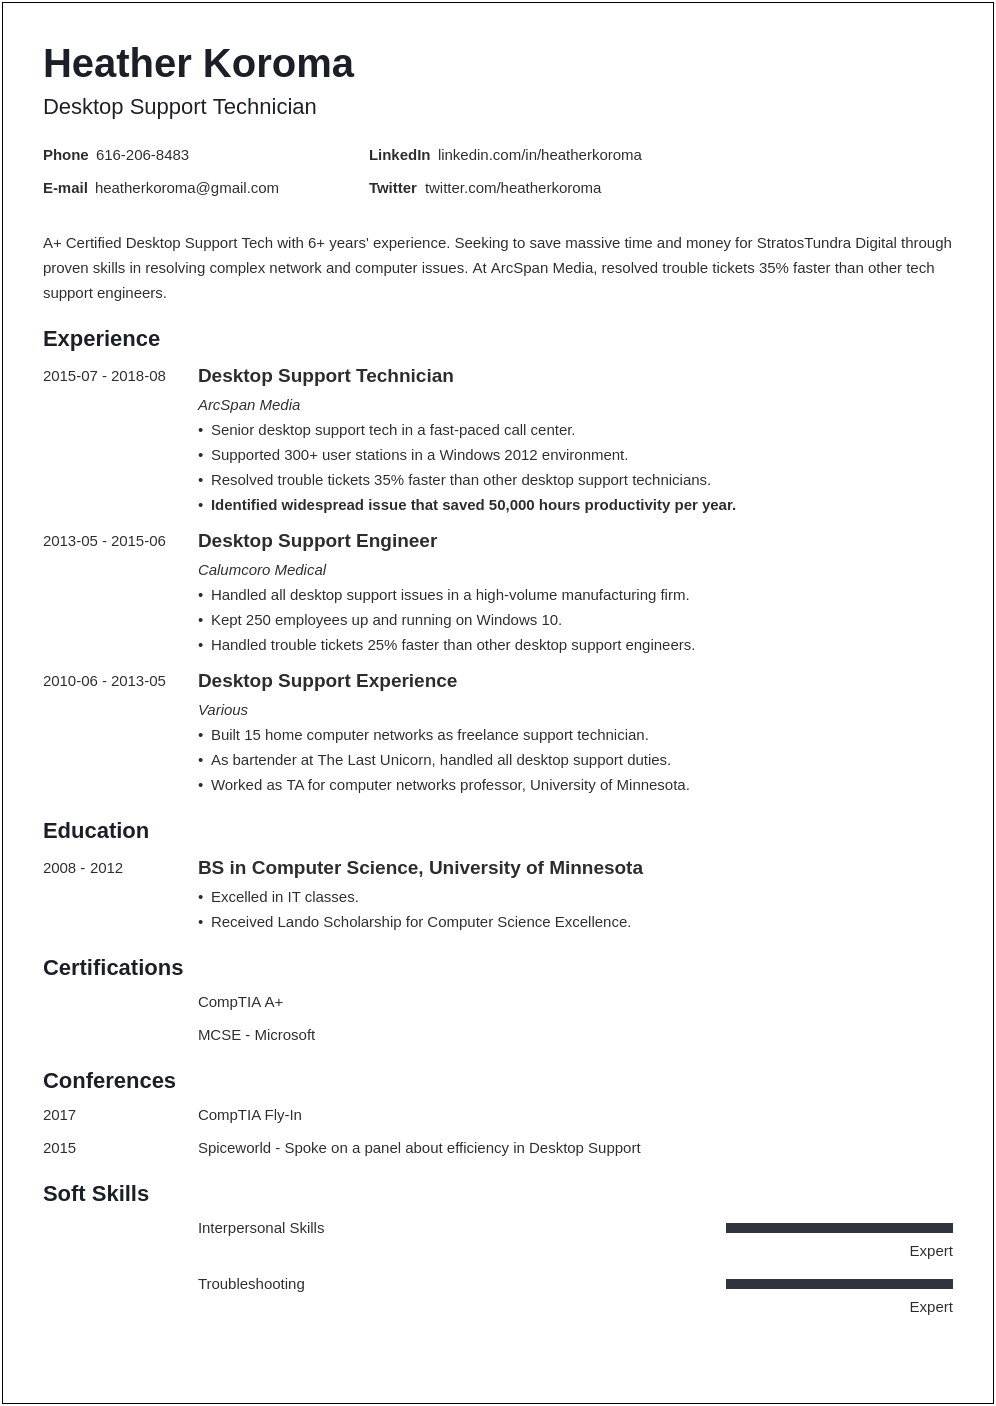 Profile Summary In Resume For Desktop Support Engineer